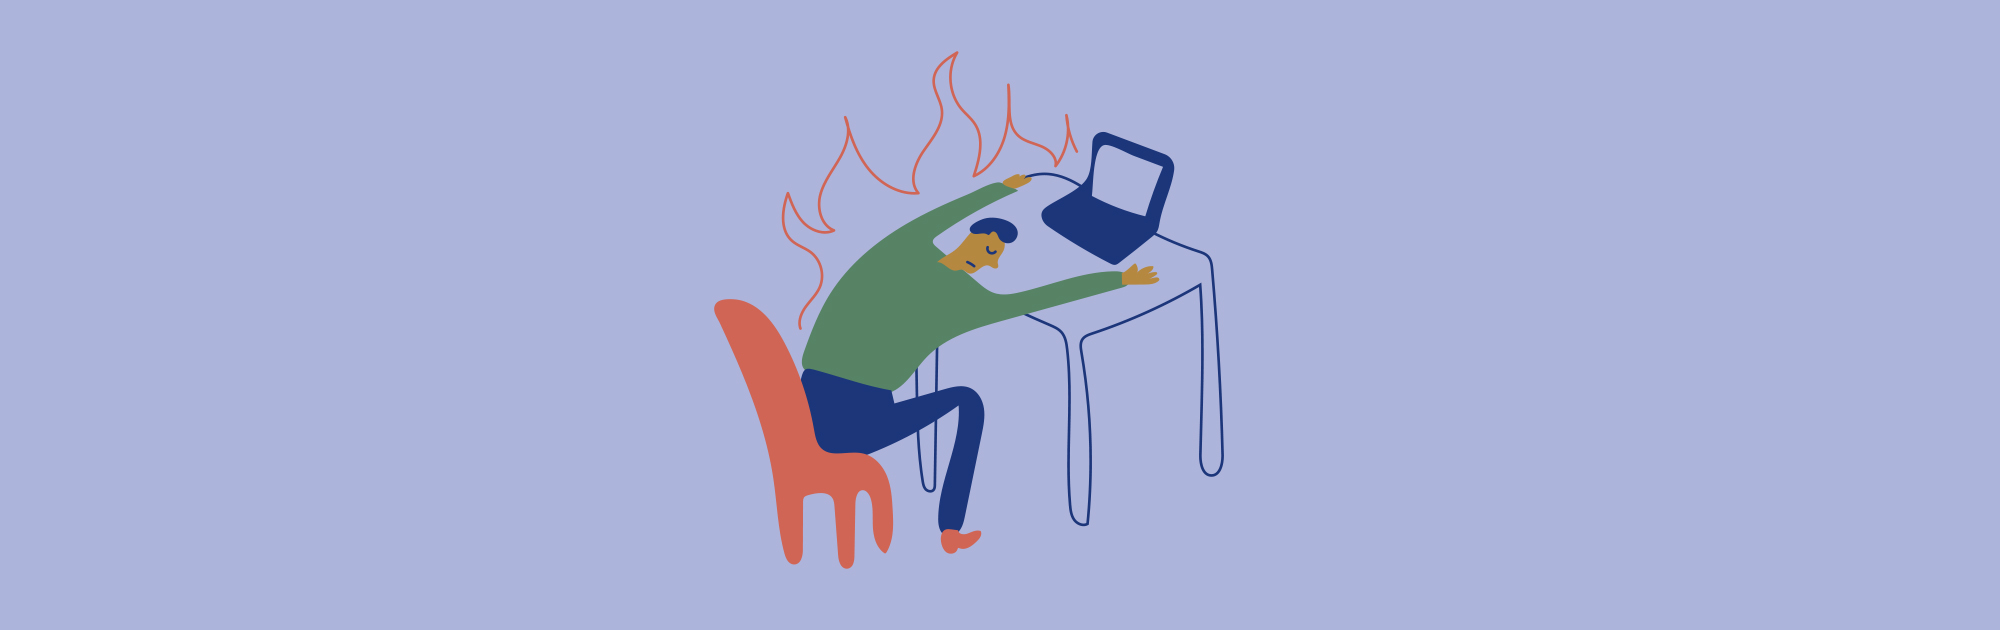 How to Prevent Burnout